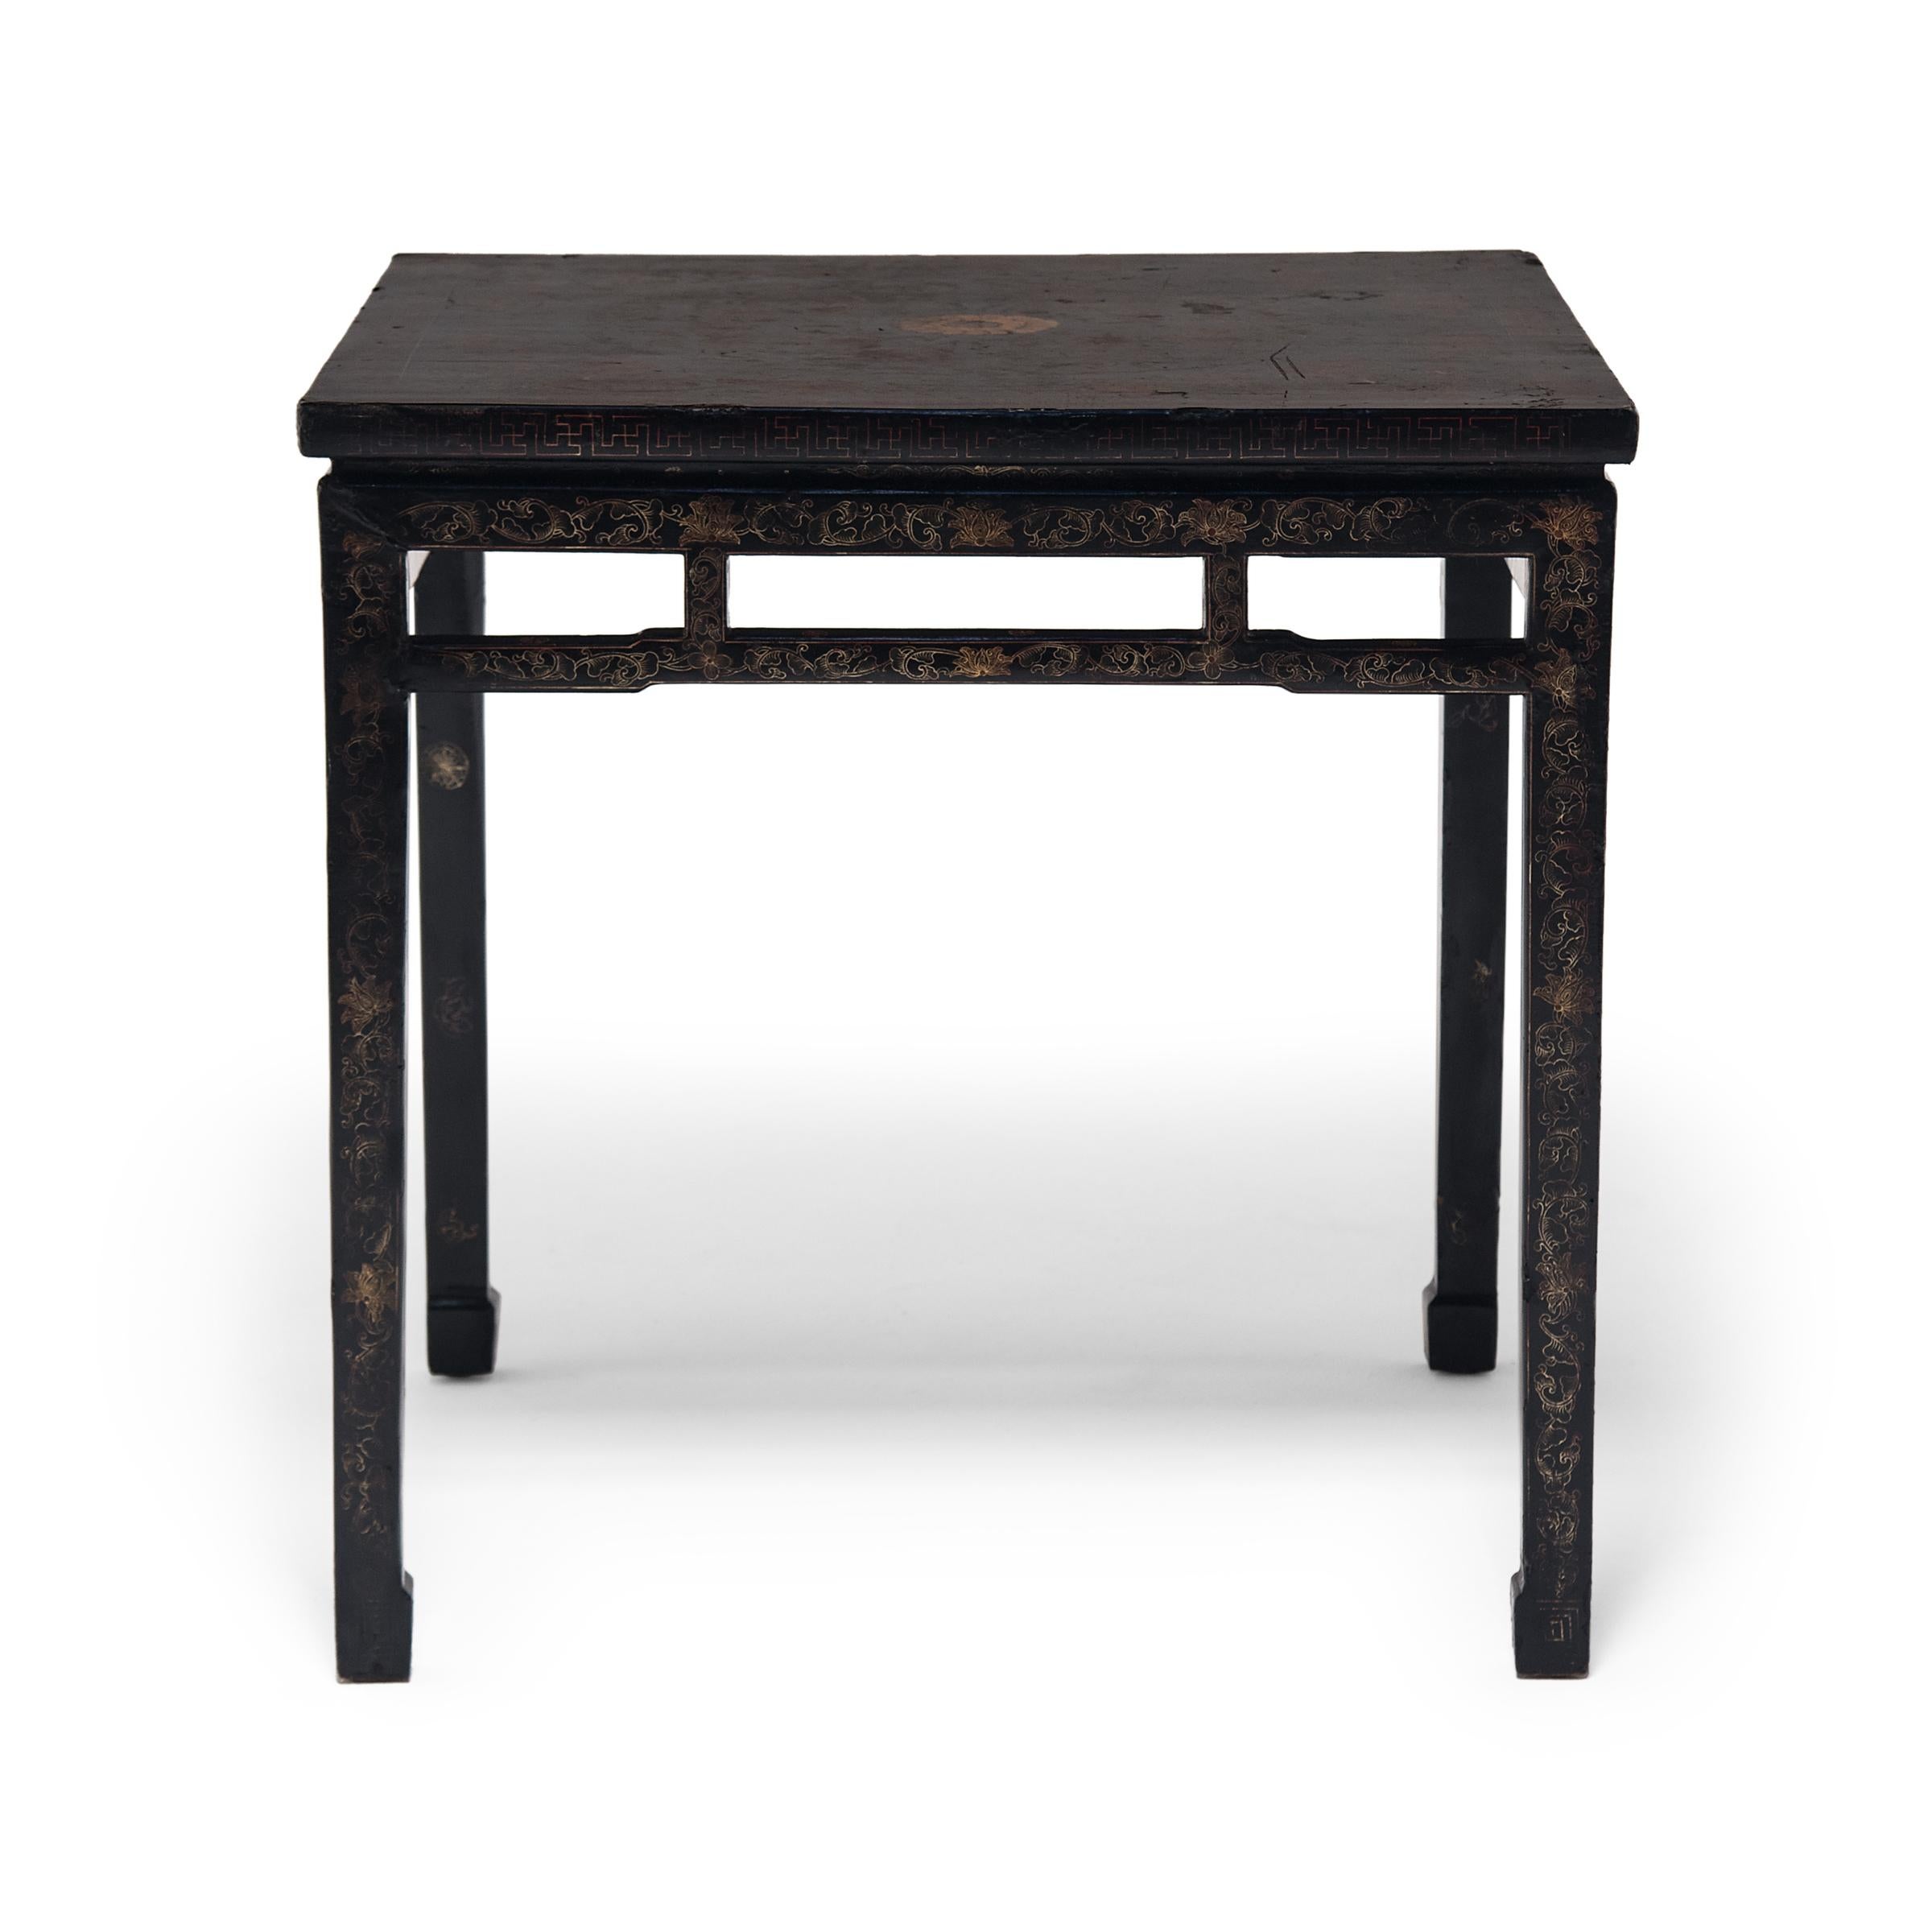 Lacquered Chinese Black Lacquer Chrysanthemum Table, circa 1900 For Sale